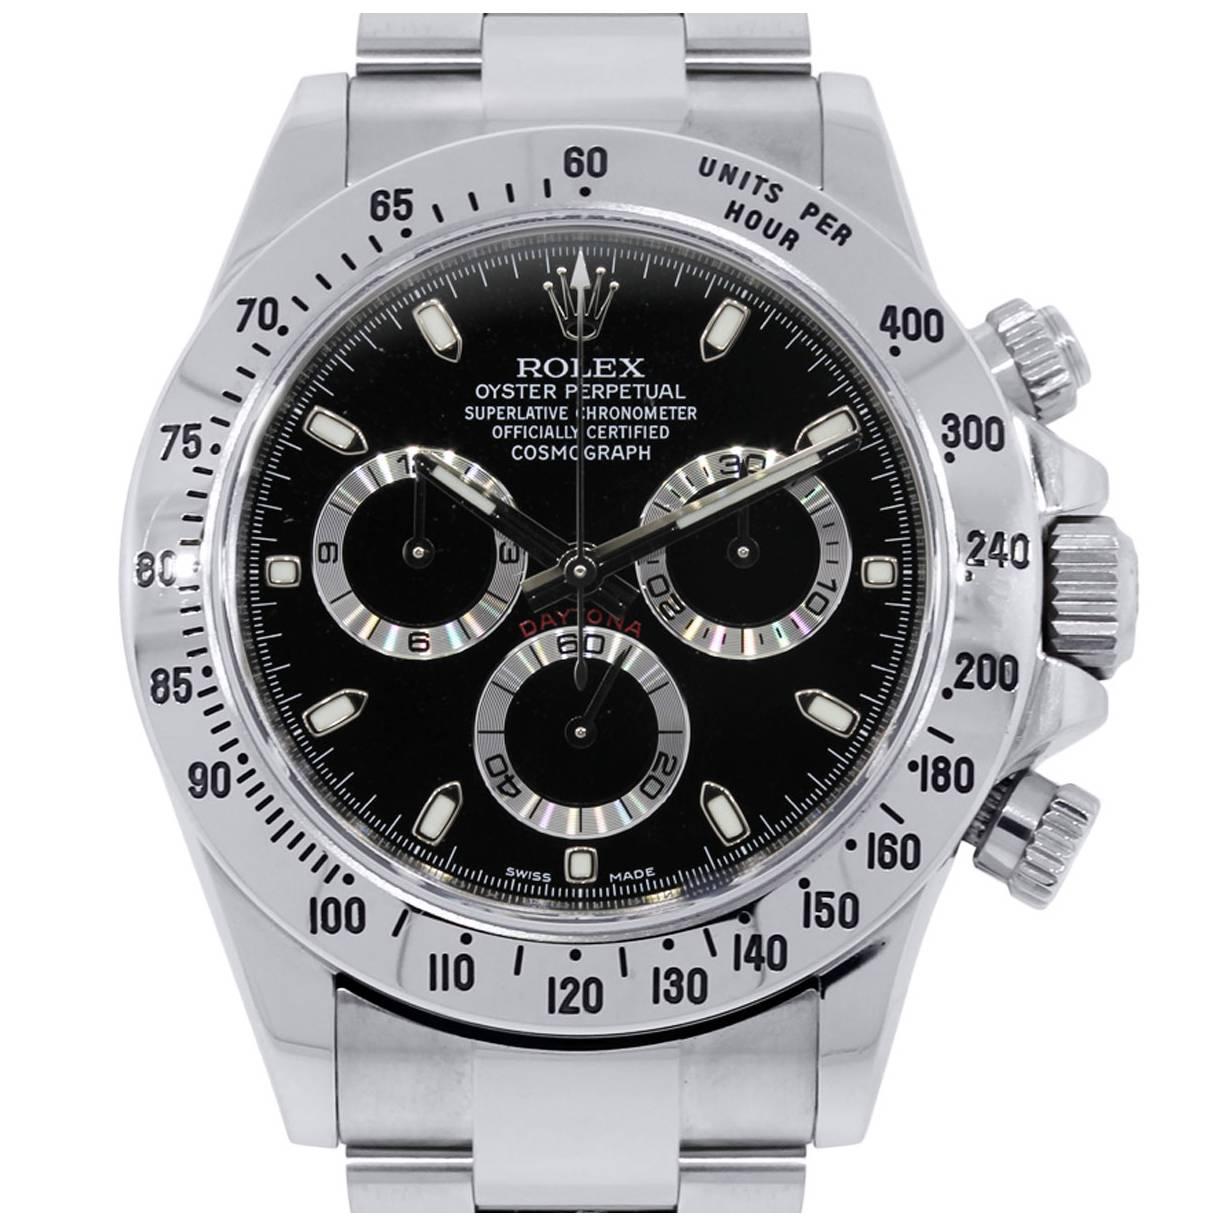 Rolex Stainless Steel Daytona Cosmograph Dial Automatic Wristwatch Ref 116520 